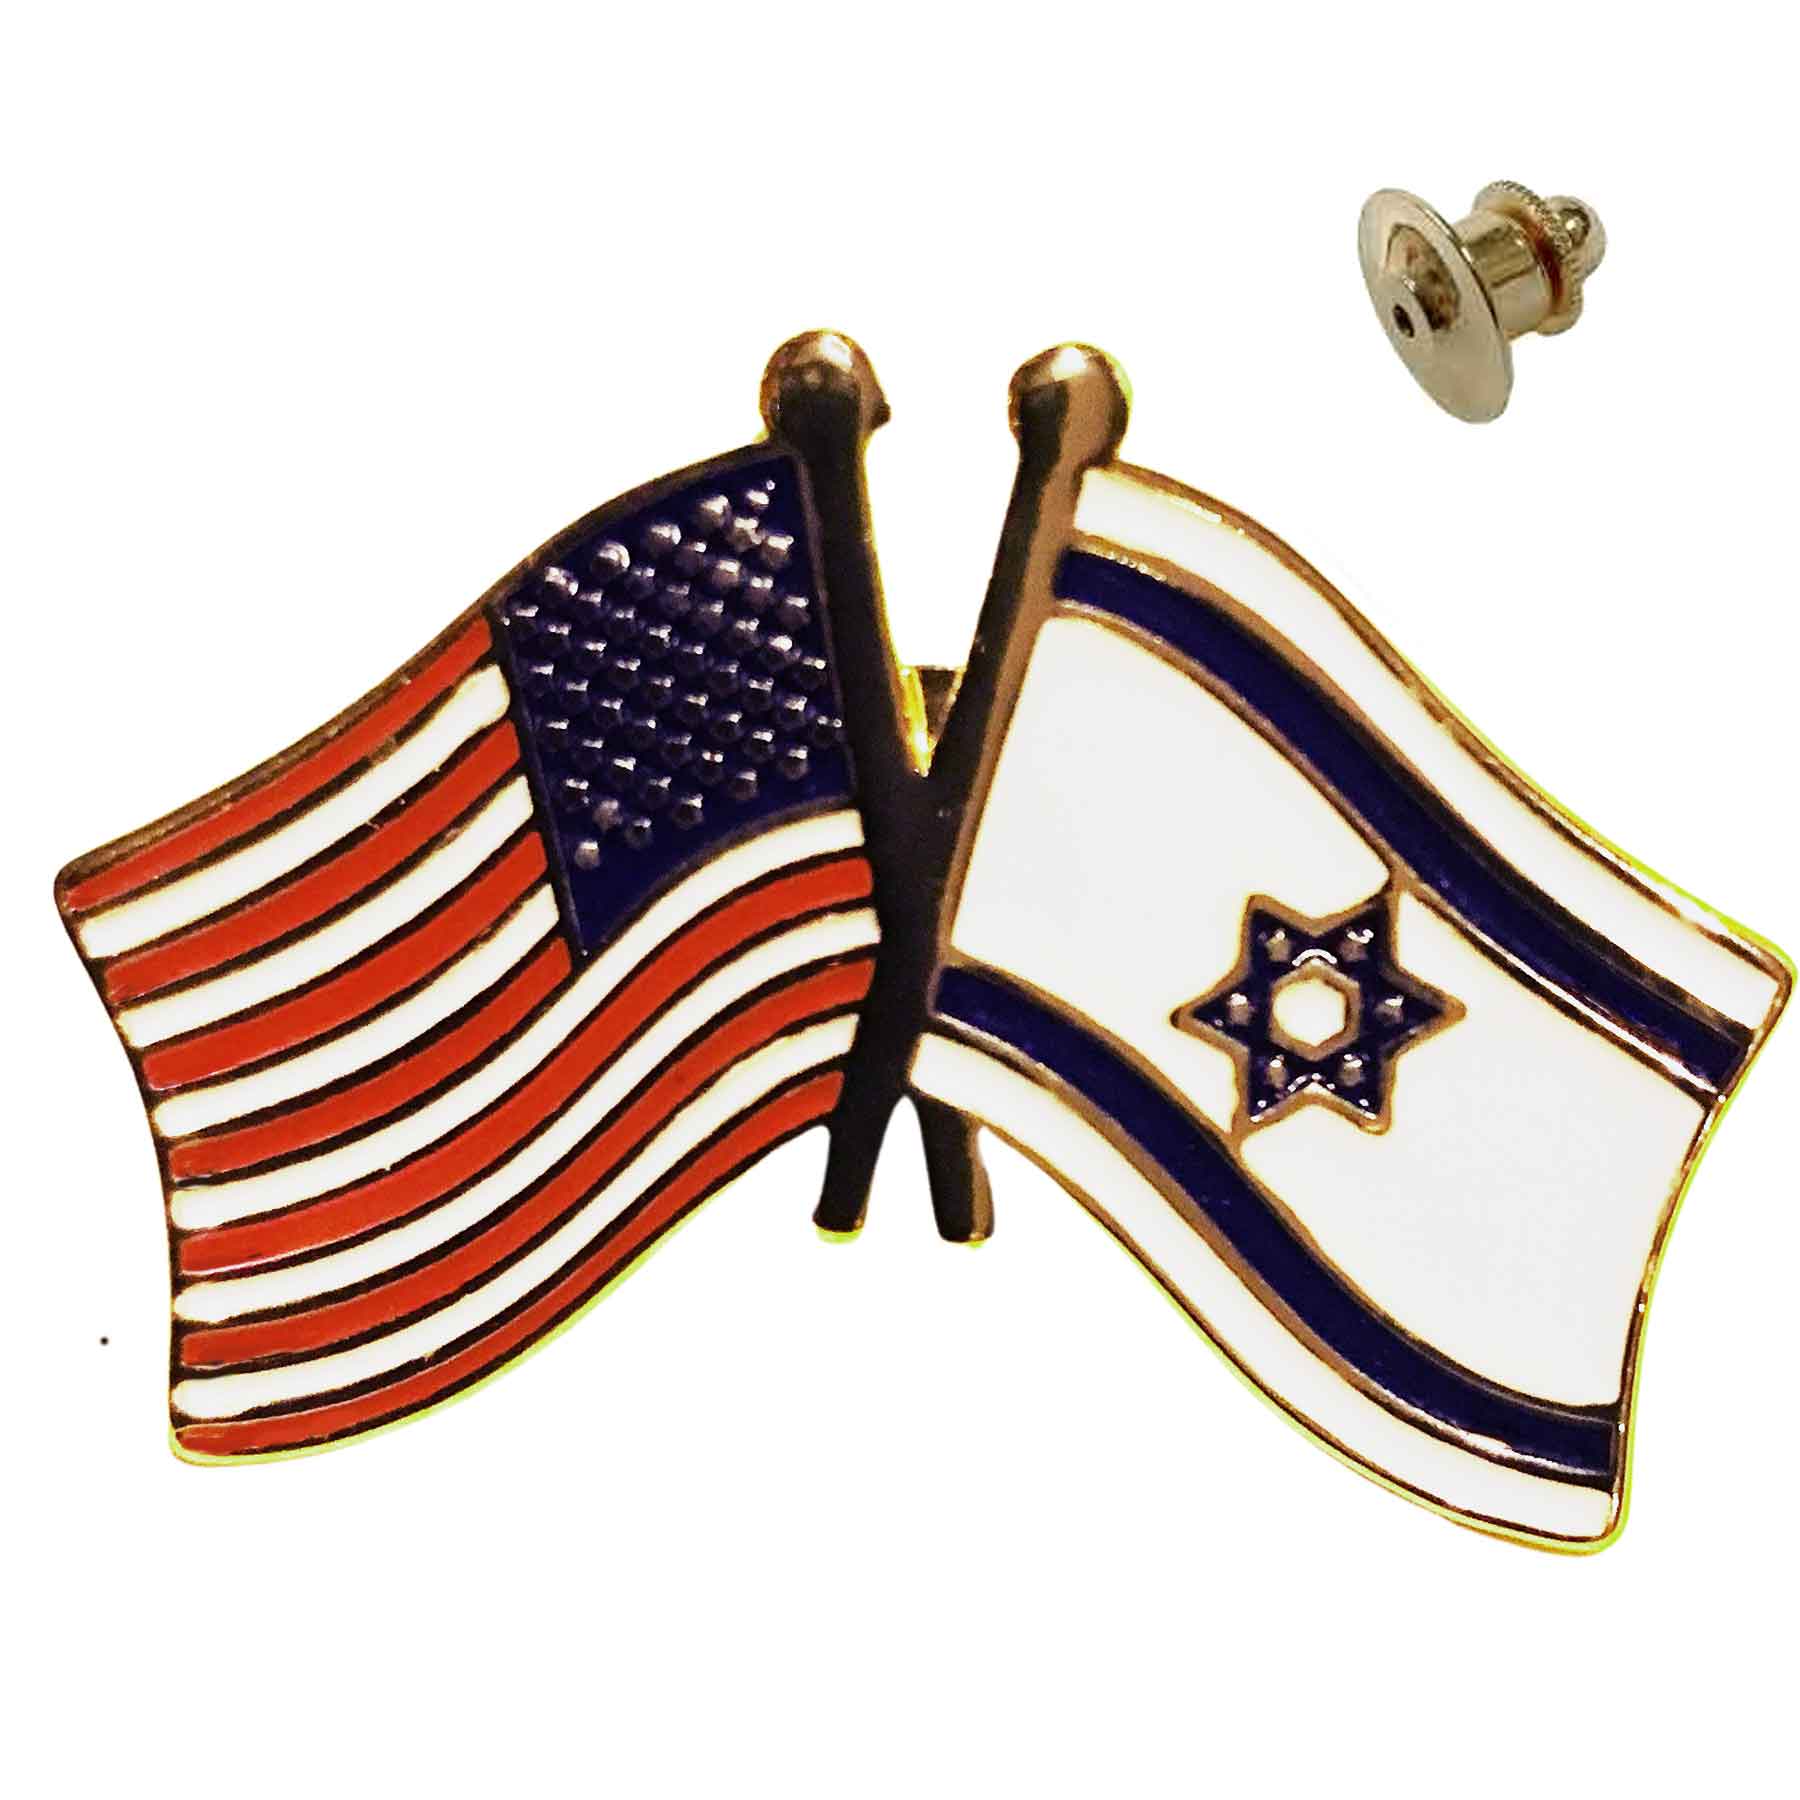 05 - USA/Israel<br>
Gold Accent Lapel Pin